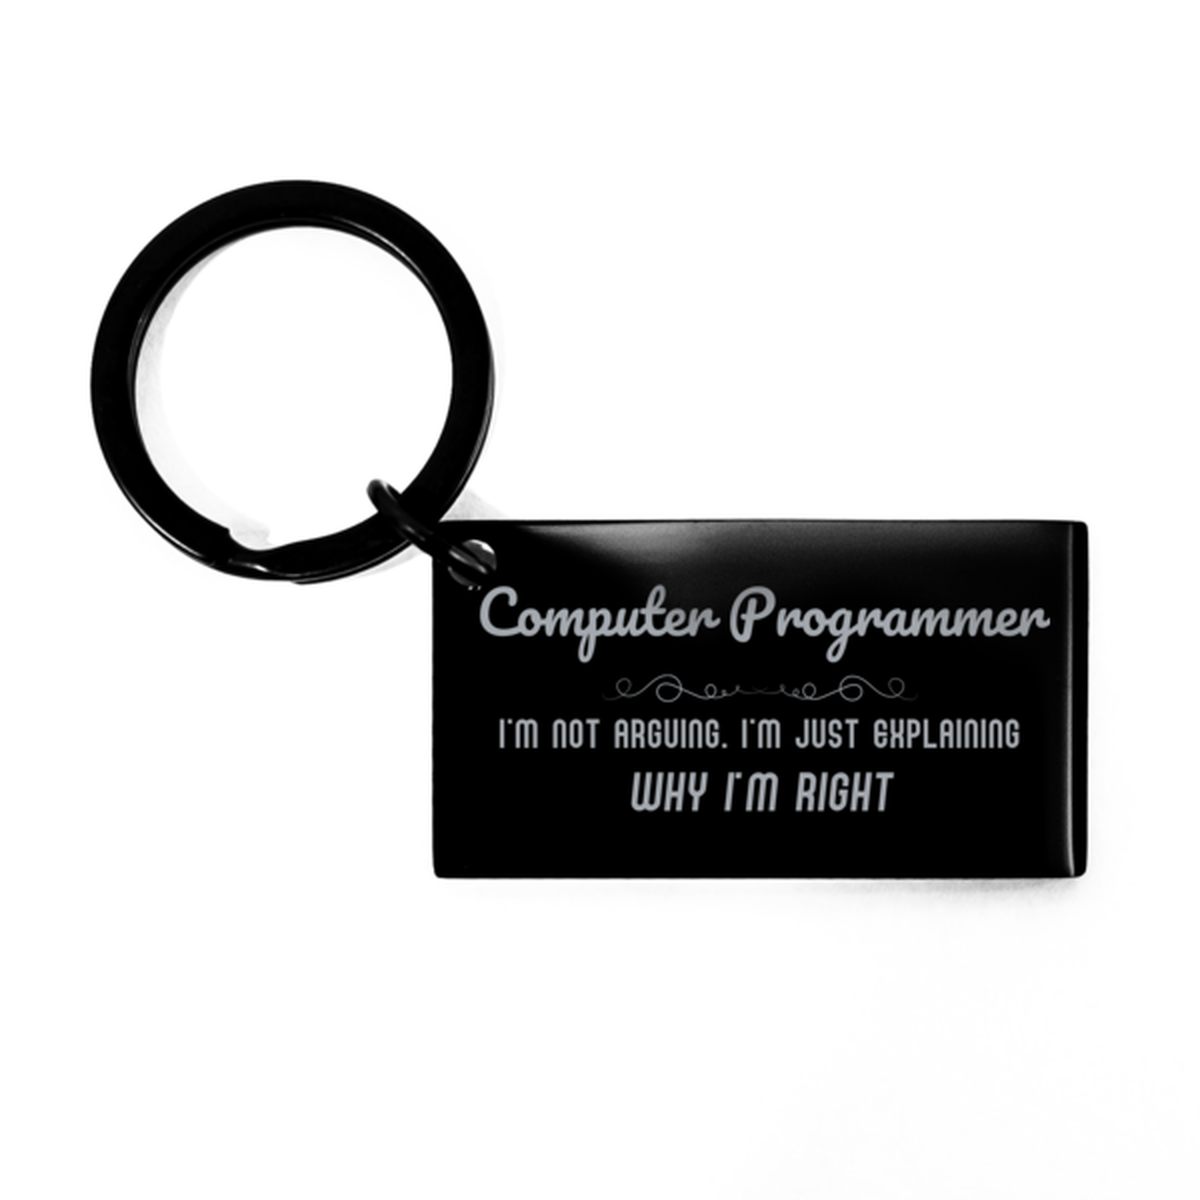 Computer Programmer I'm not Arguing. I'm Just Explaining Why I'm RIGHT Keychain, Funny Saying Quote Computer Programmer Gifts For Computer Programmer Graduation Birthday Christmas Gifts for Men Women Coworker